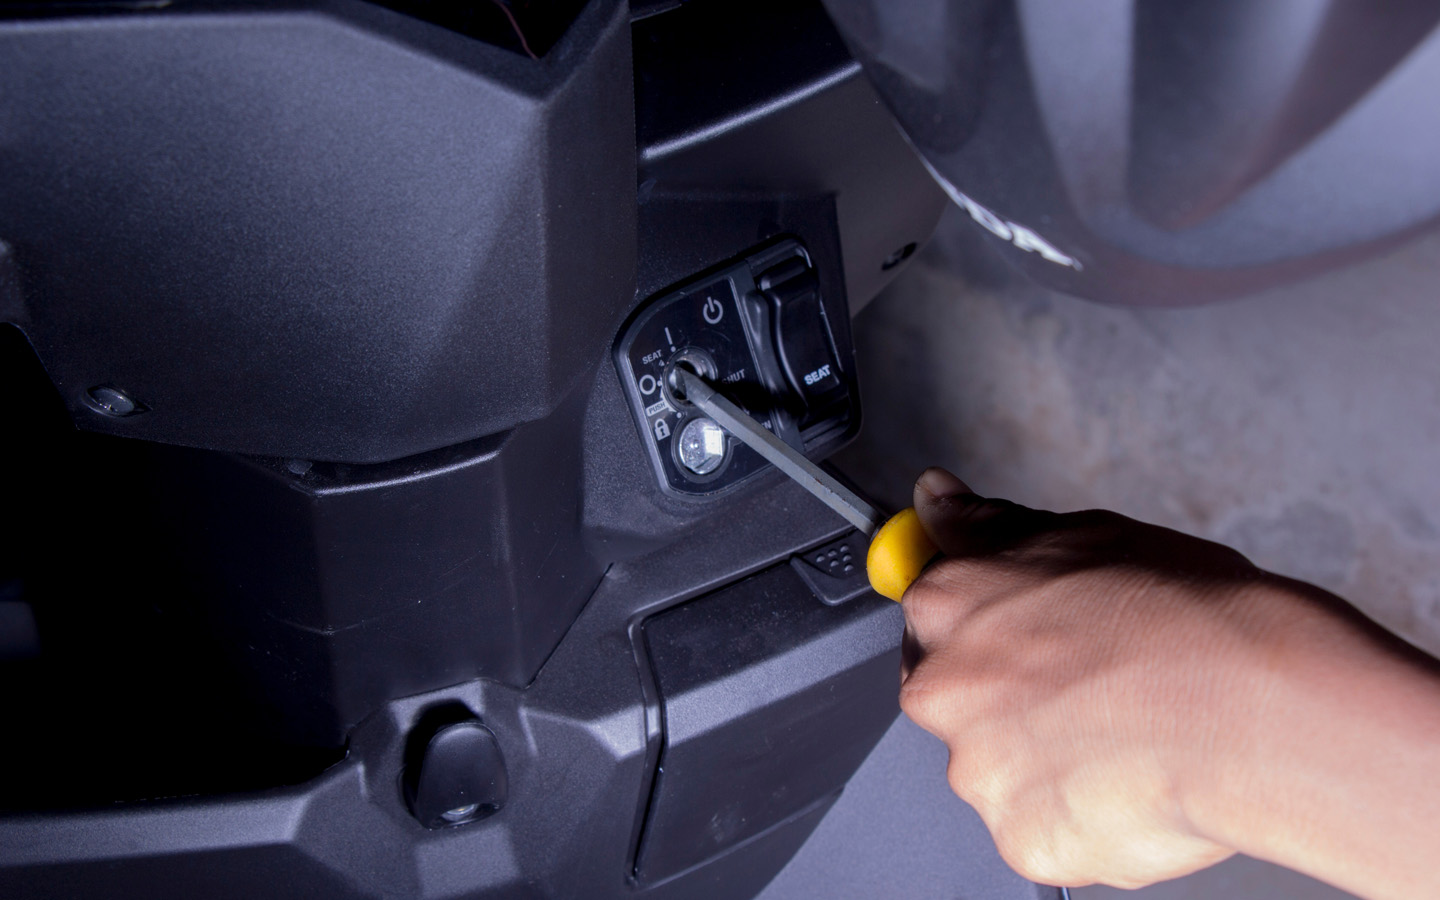 you can learn how to hotwire a car by inserting screwdriver in ignition keyhole